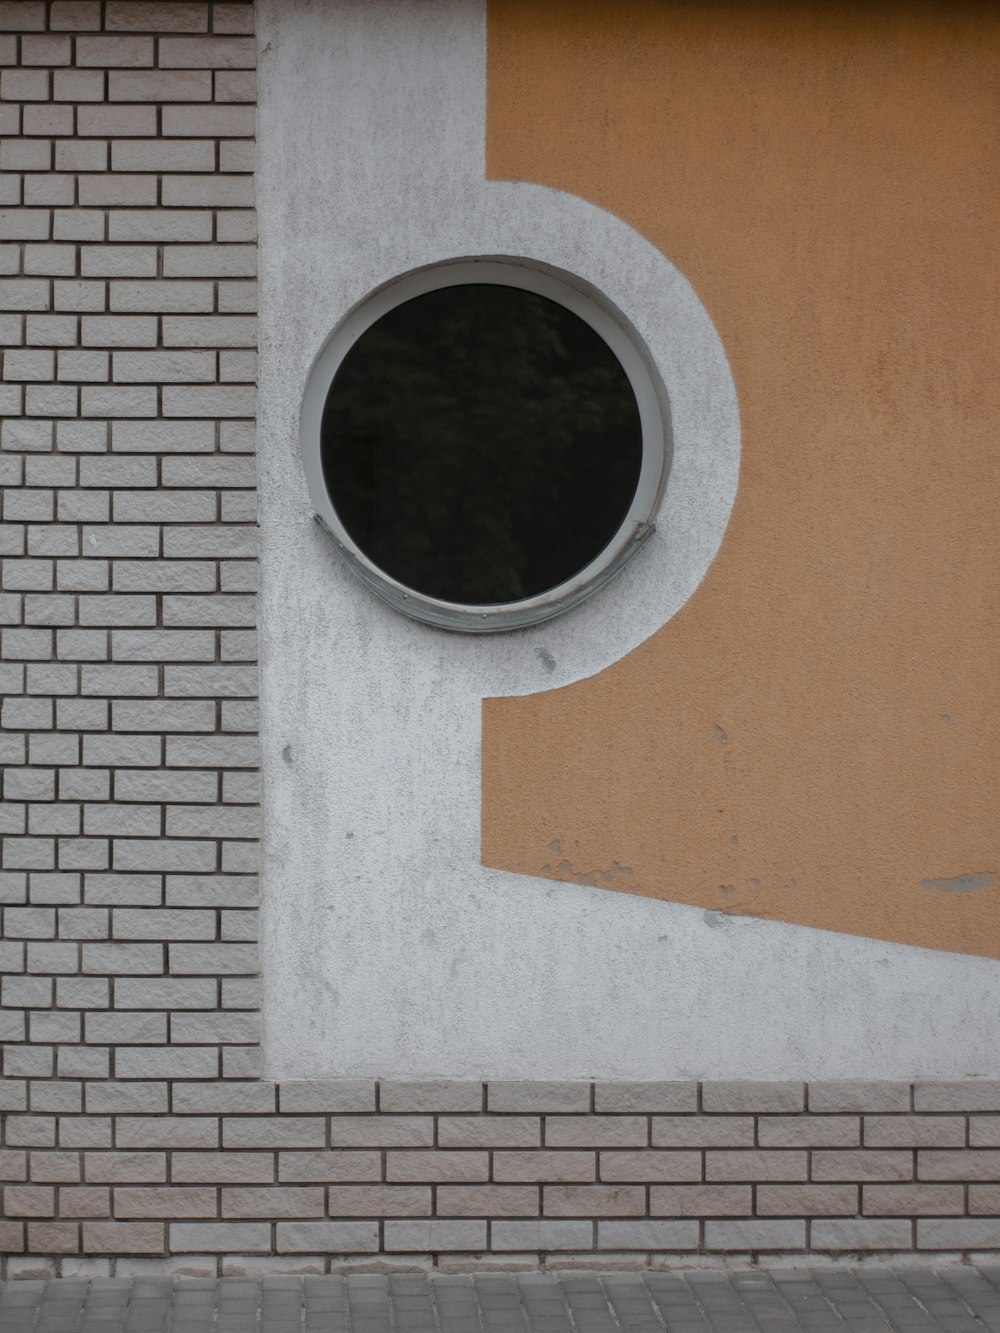 a round window on the side of a building